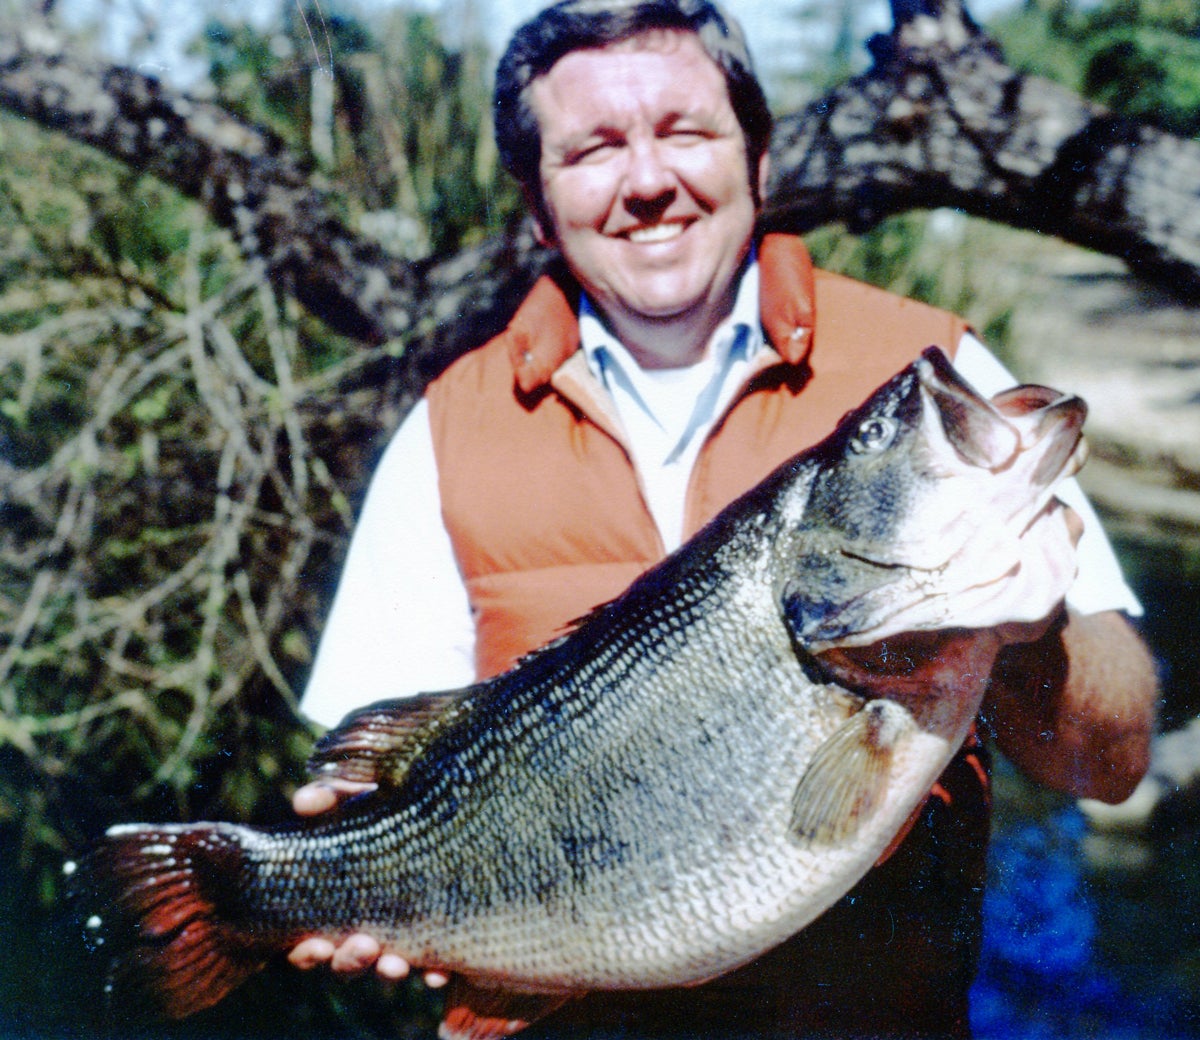 The Biggest Bass Ever Caught